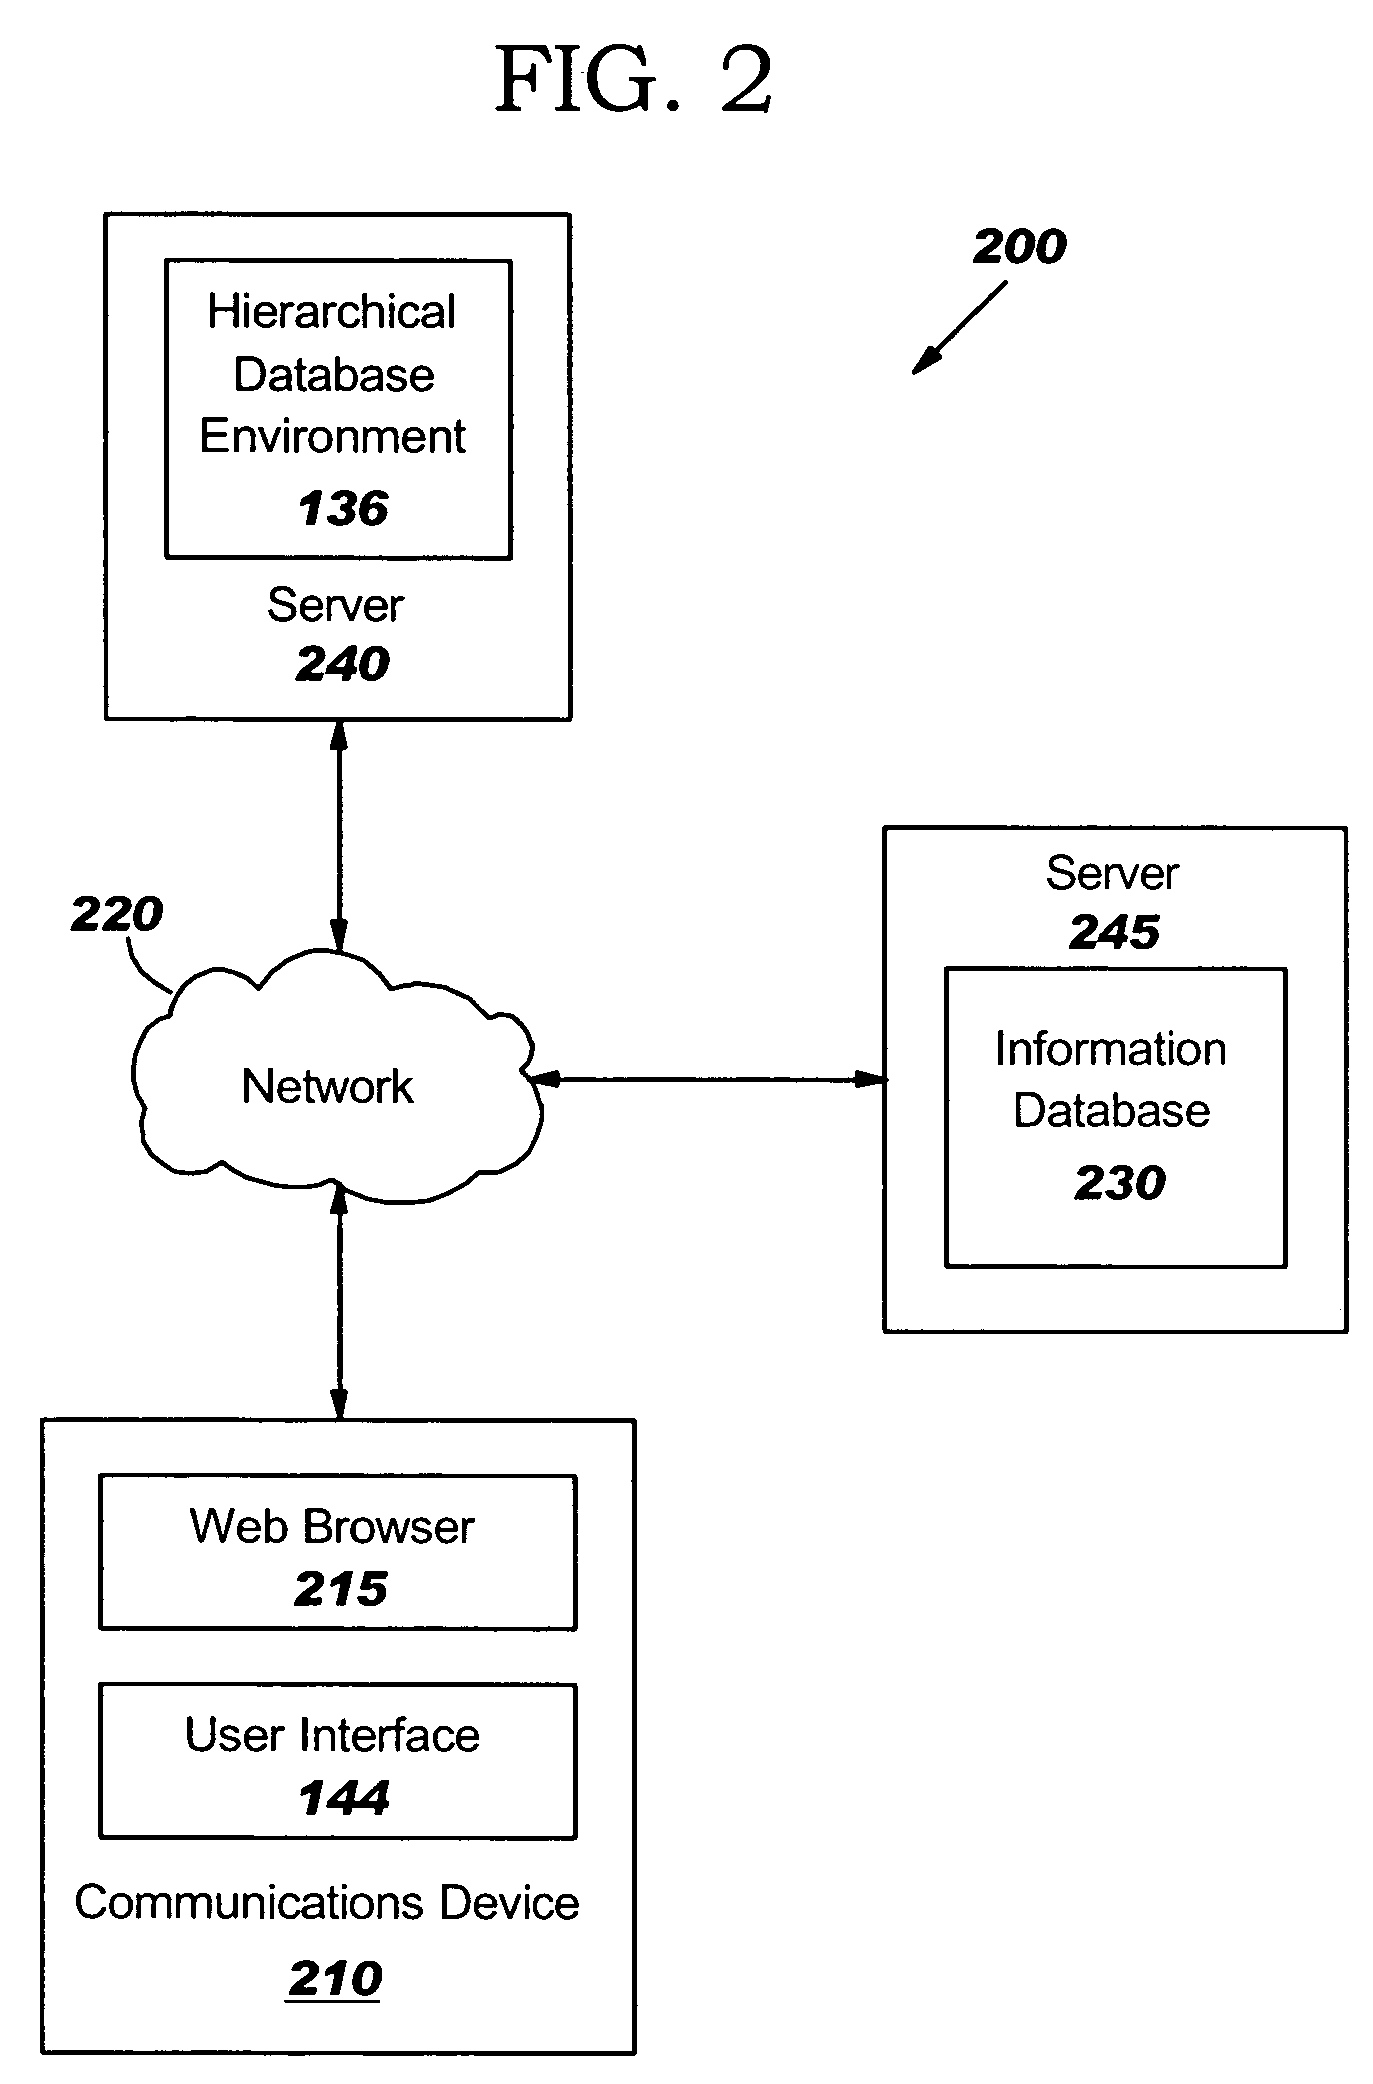 Methods, systems, computer program products and data structures for hierarchical organization of data associated with medical events in databases